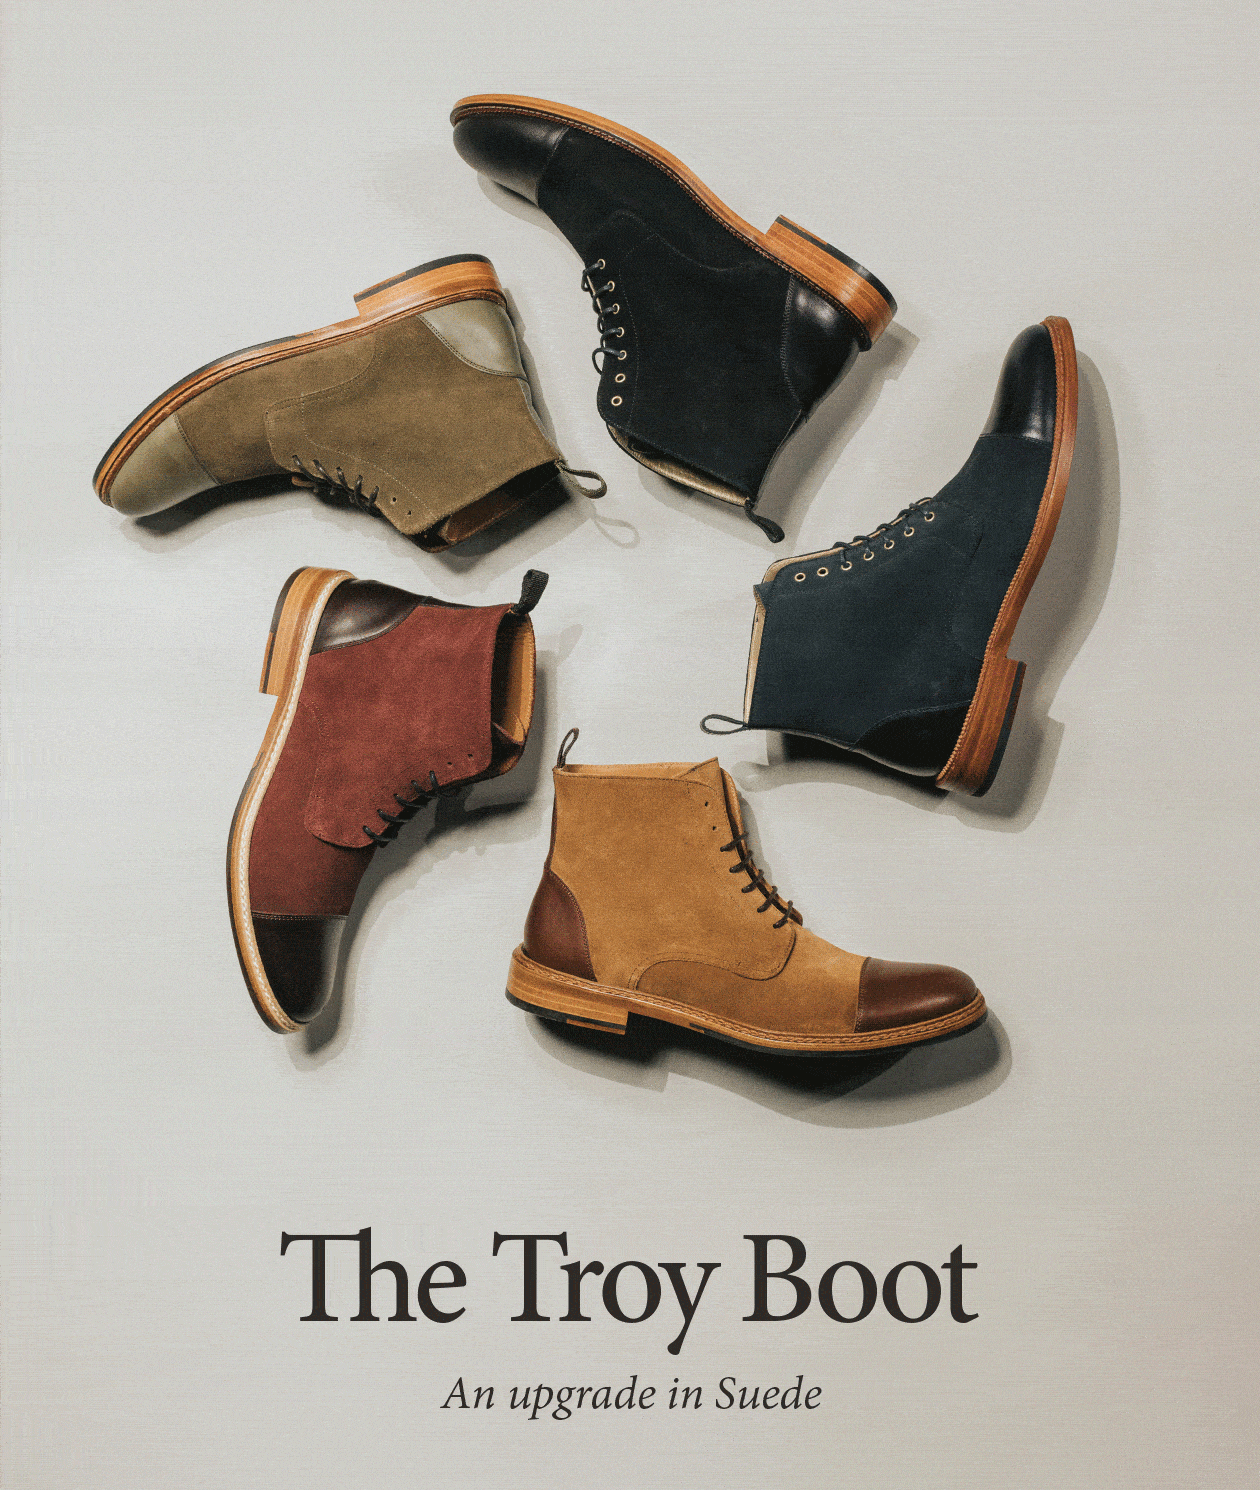 The Troy Boot